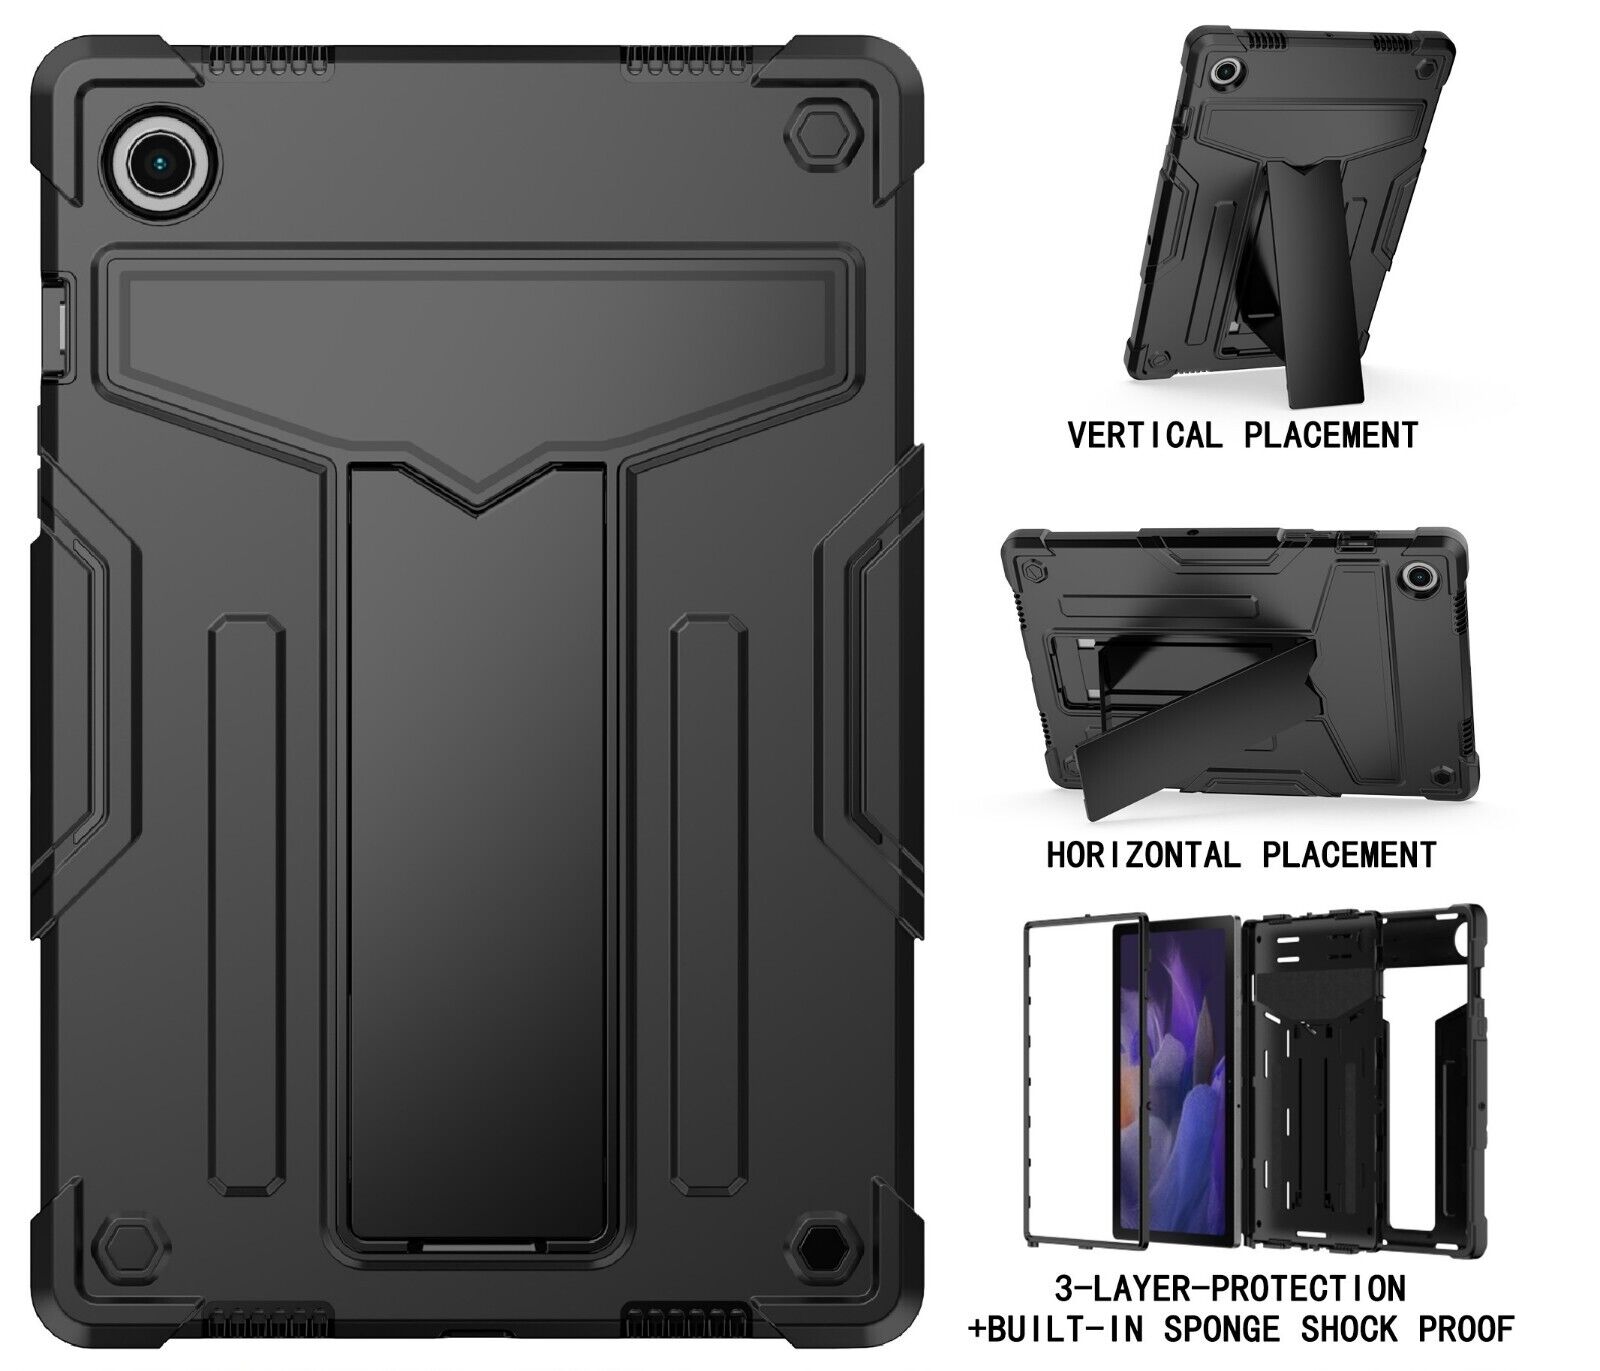 Case For Samsung Galaxy Tab A9/ A9+ 5G/ A9 Plus Kids Shockproof Cover with Stand